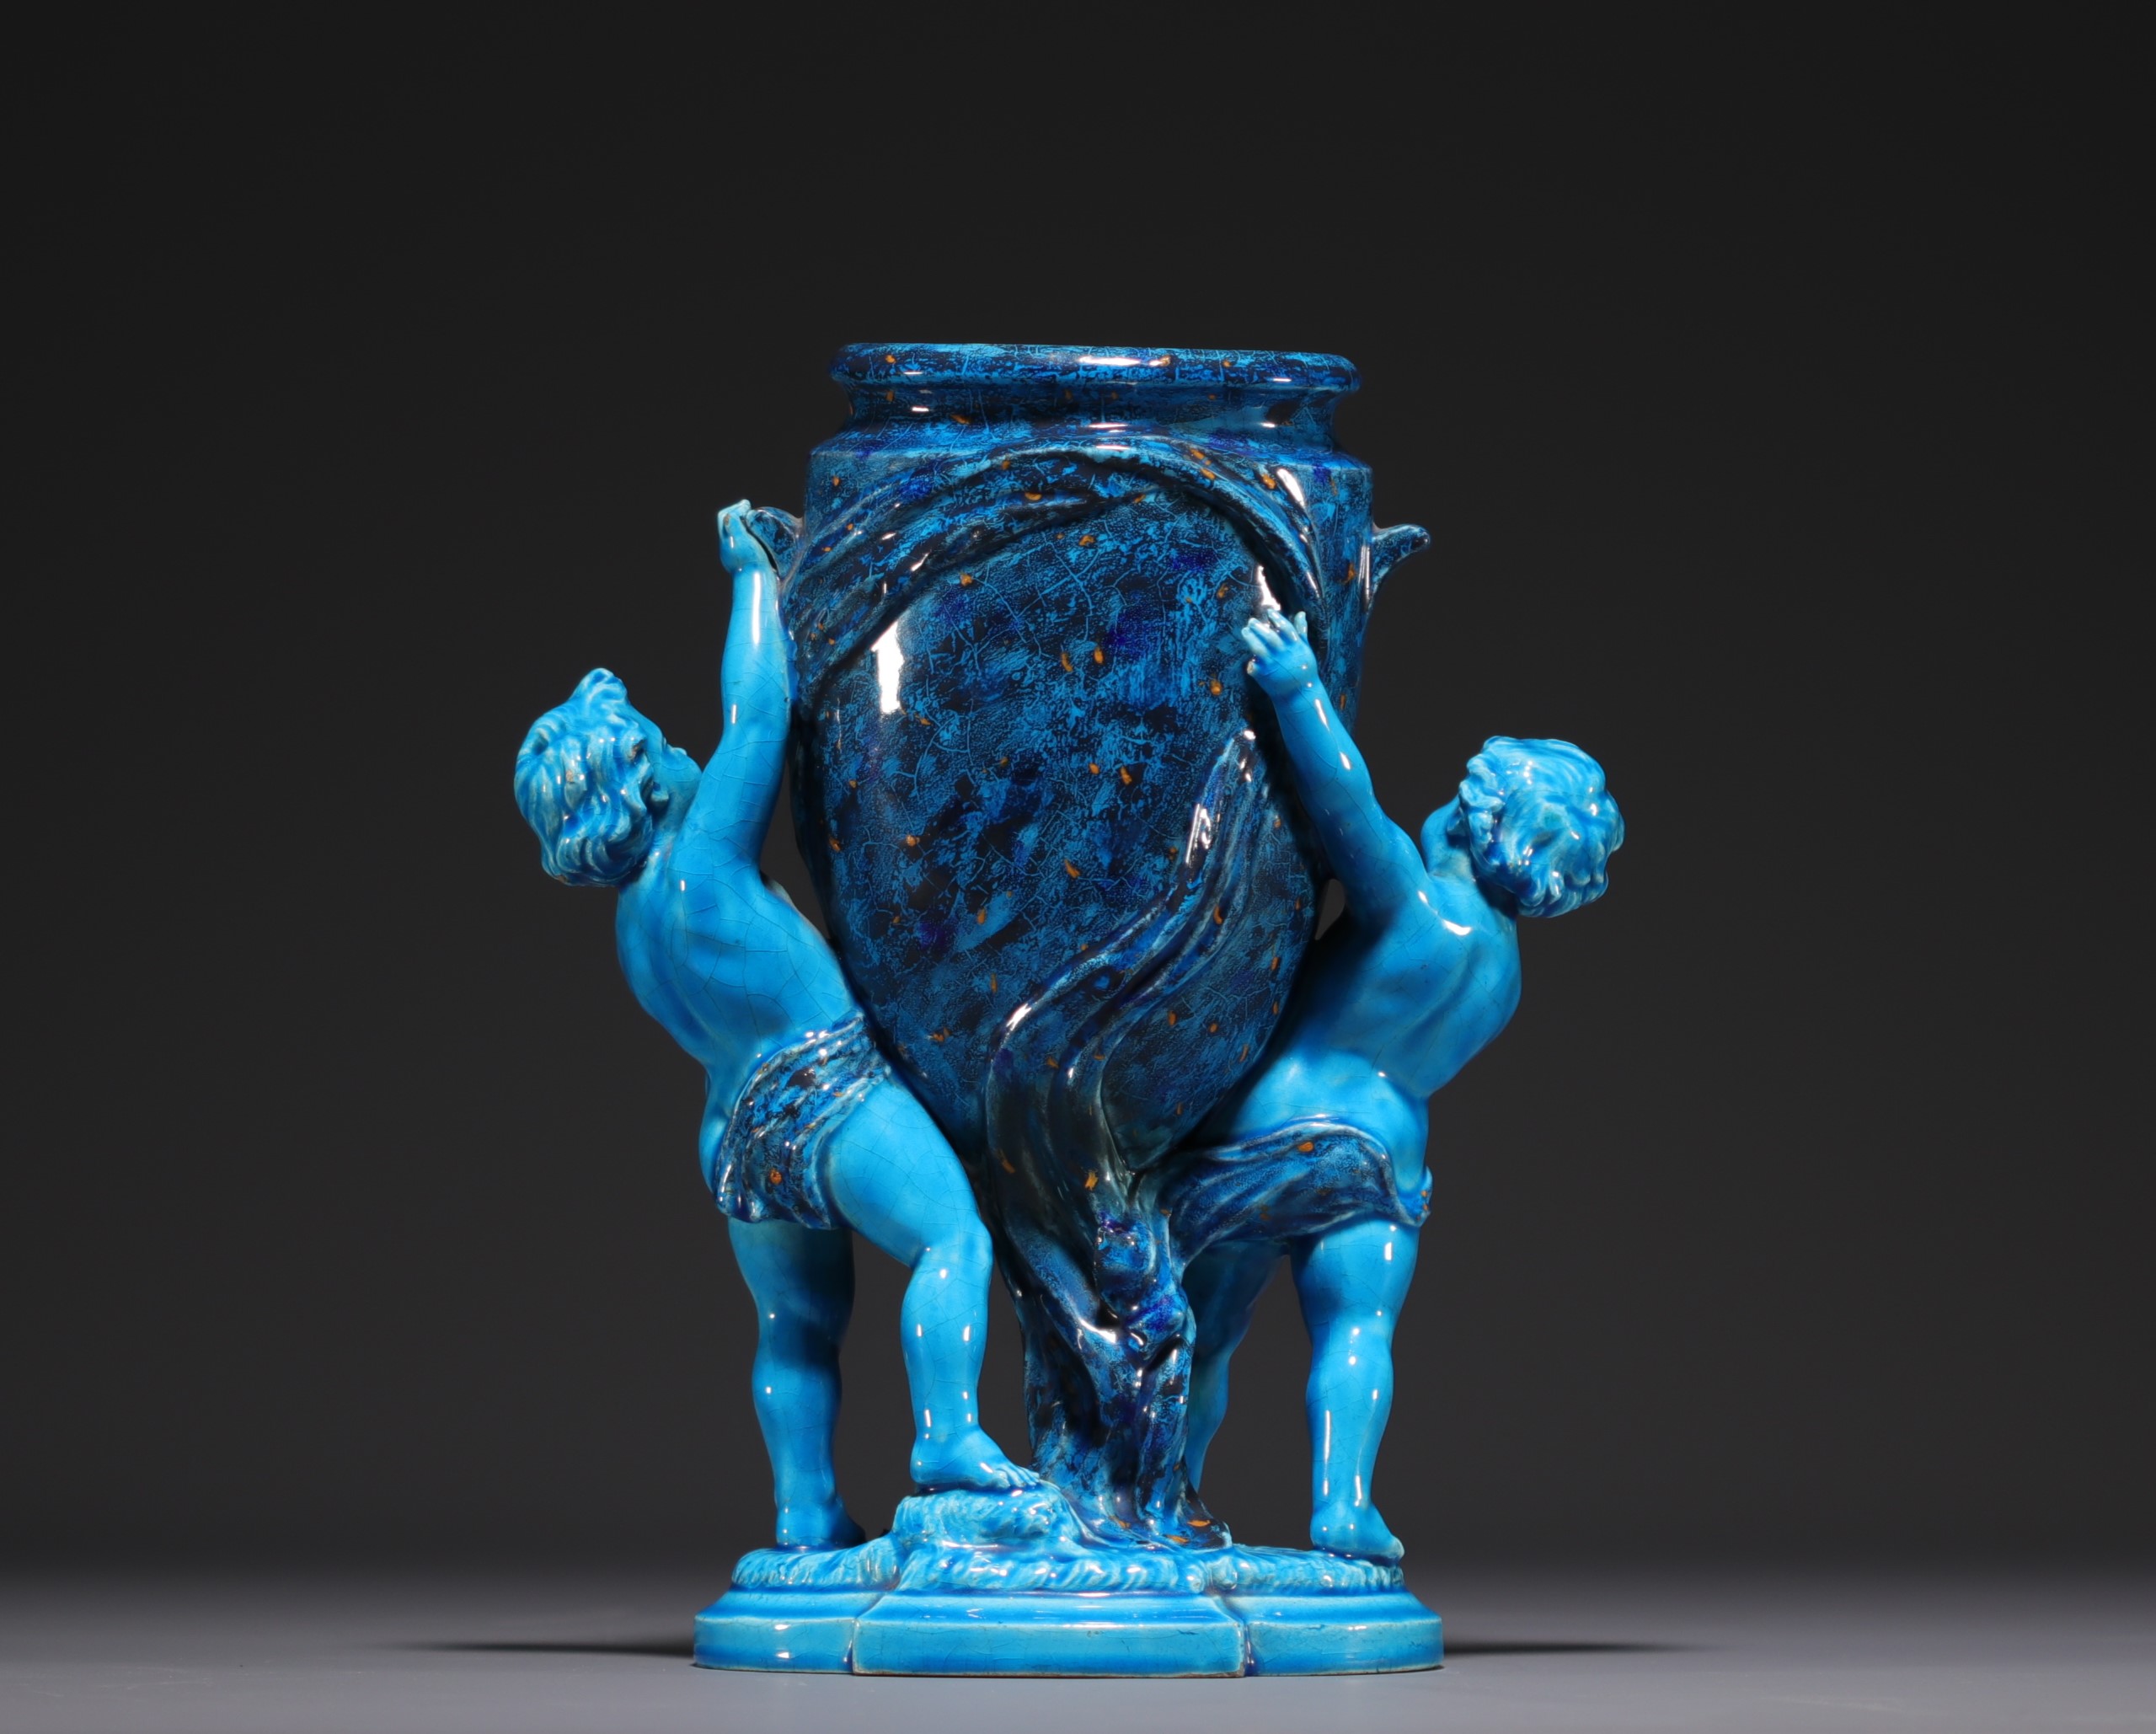 Paul MILLET (1870-1950) Blue and gold "Urne aux Putti" vase. - Image 4 of 5